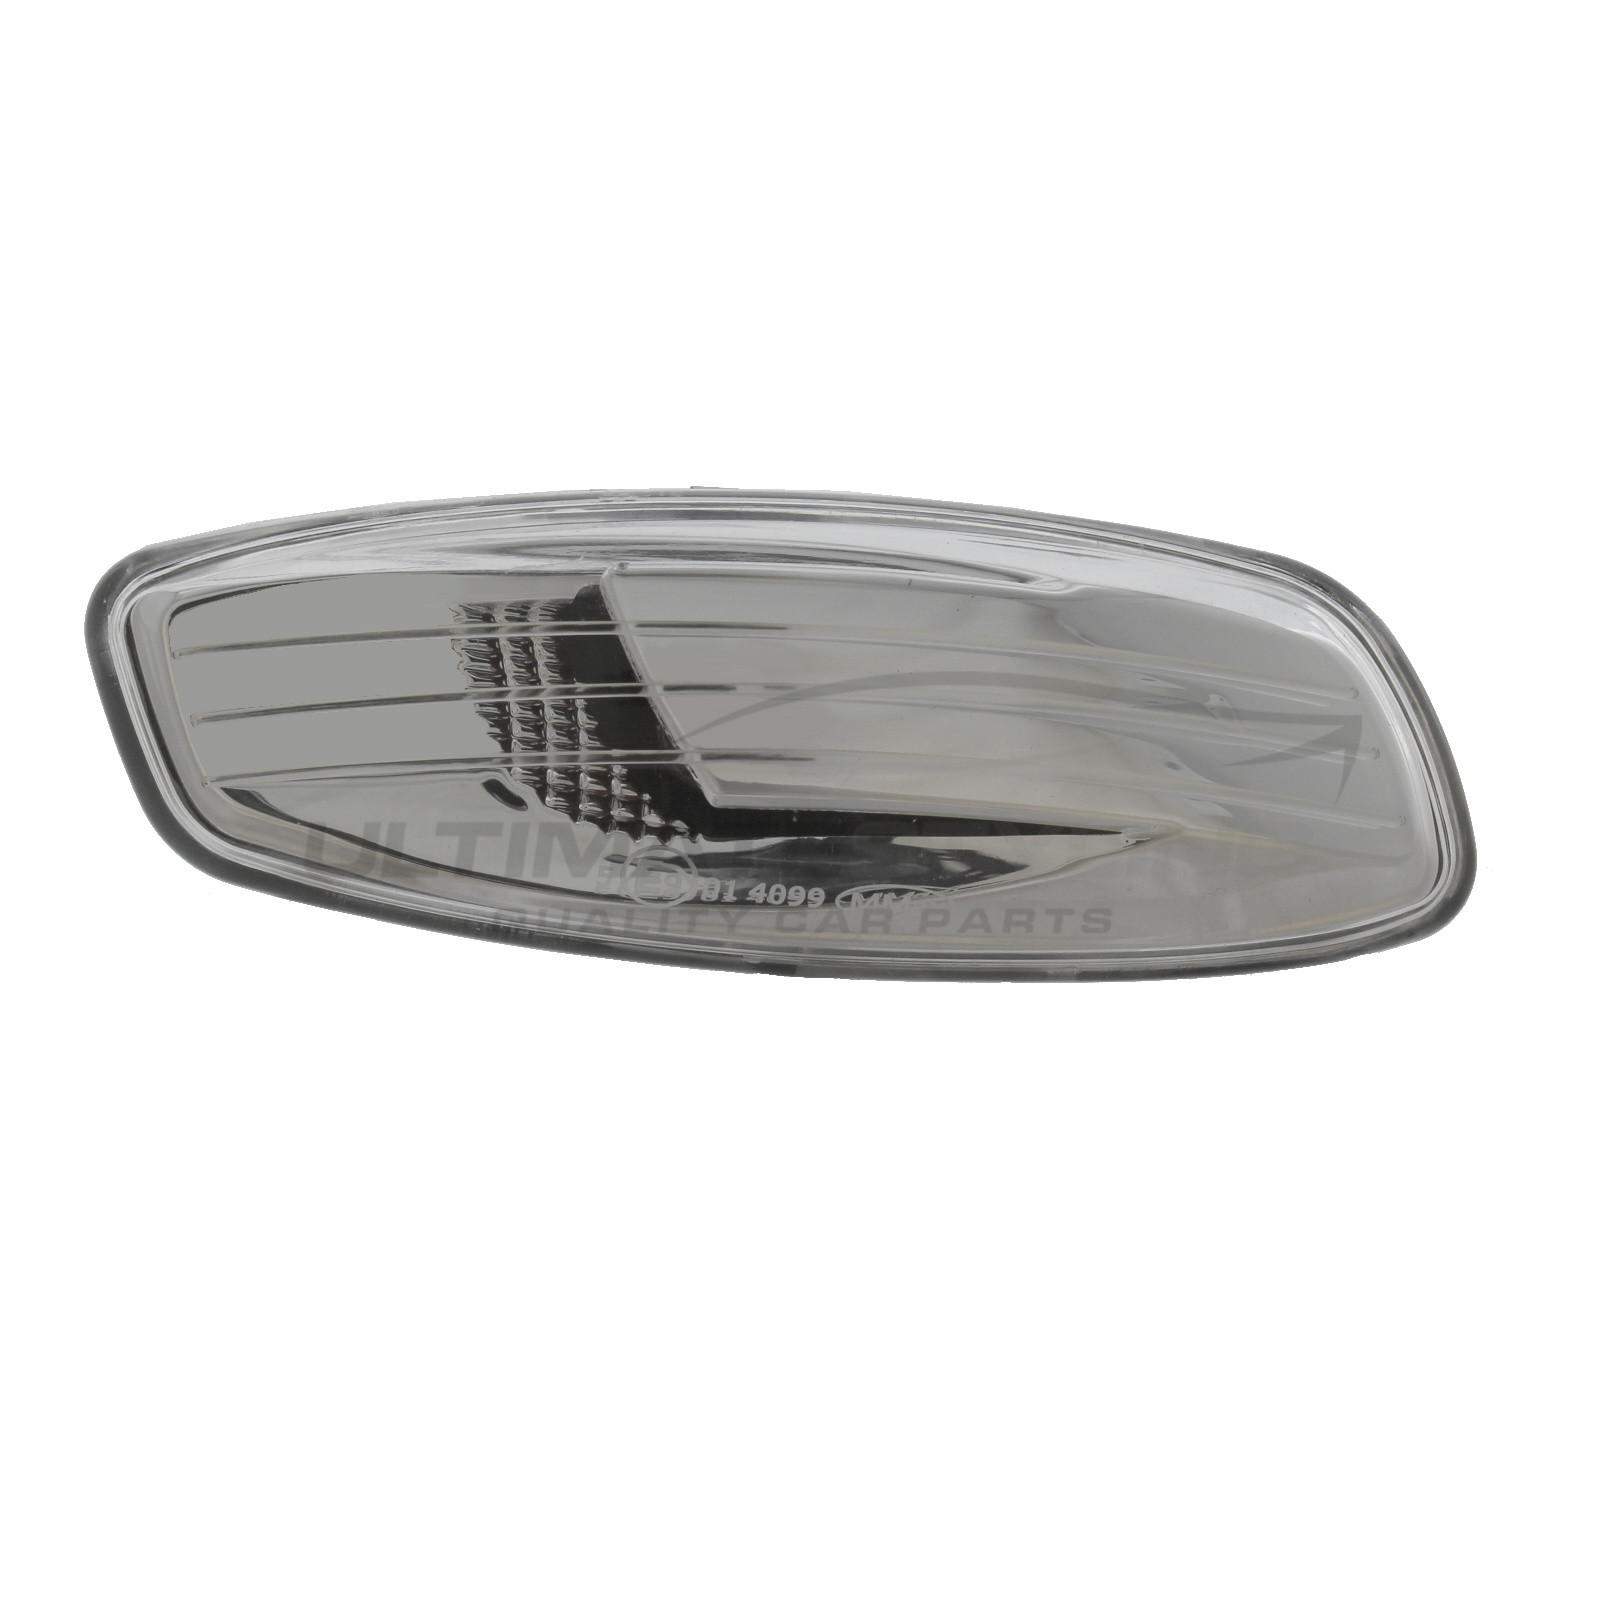 Citroen C3, C3 Picasso, C4, C4 Grand Picasso, C4 Picasso, C5, DS3, DS4 / DS DS3, DS DS4, DS DS4 Crossback / Peugeot 207, 3008, 308, 5008, RCZ Clear Non-LED (WY5W) Wing Mirror Indicator Fits Within Mirror Base Drivers Side Right Hand